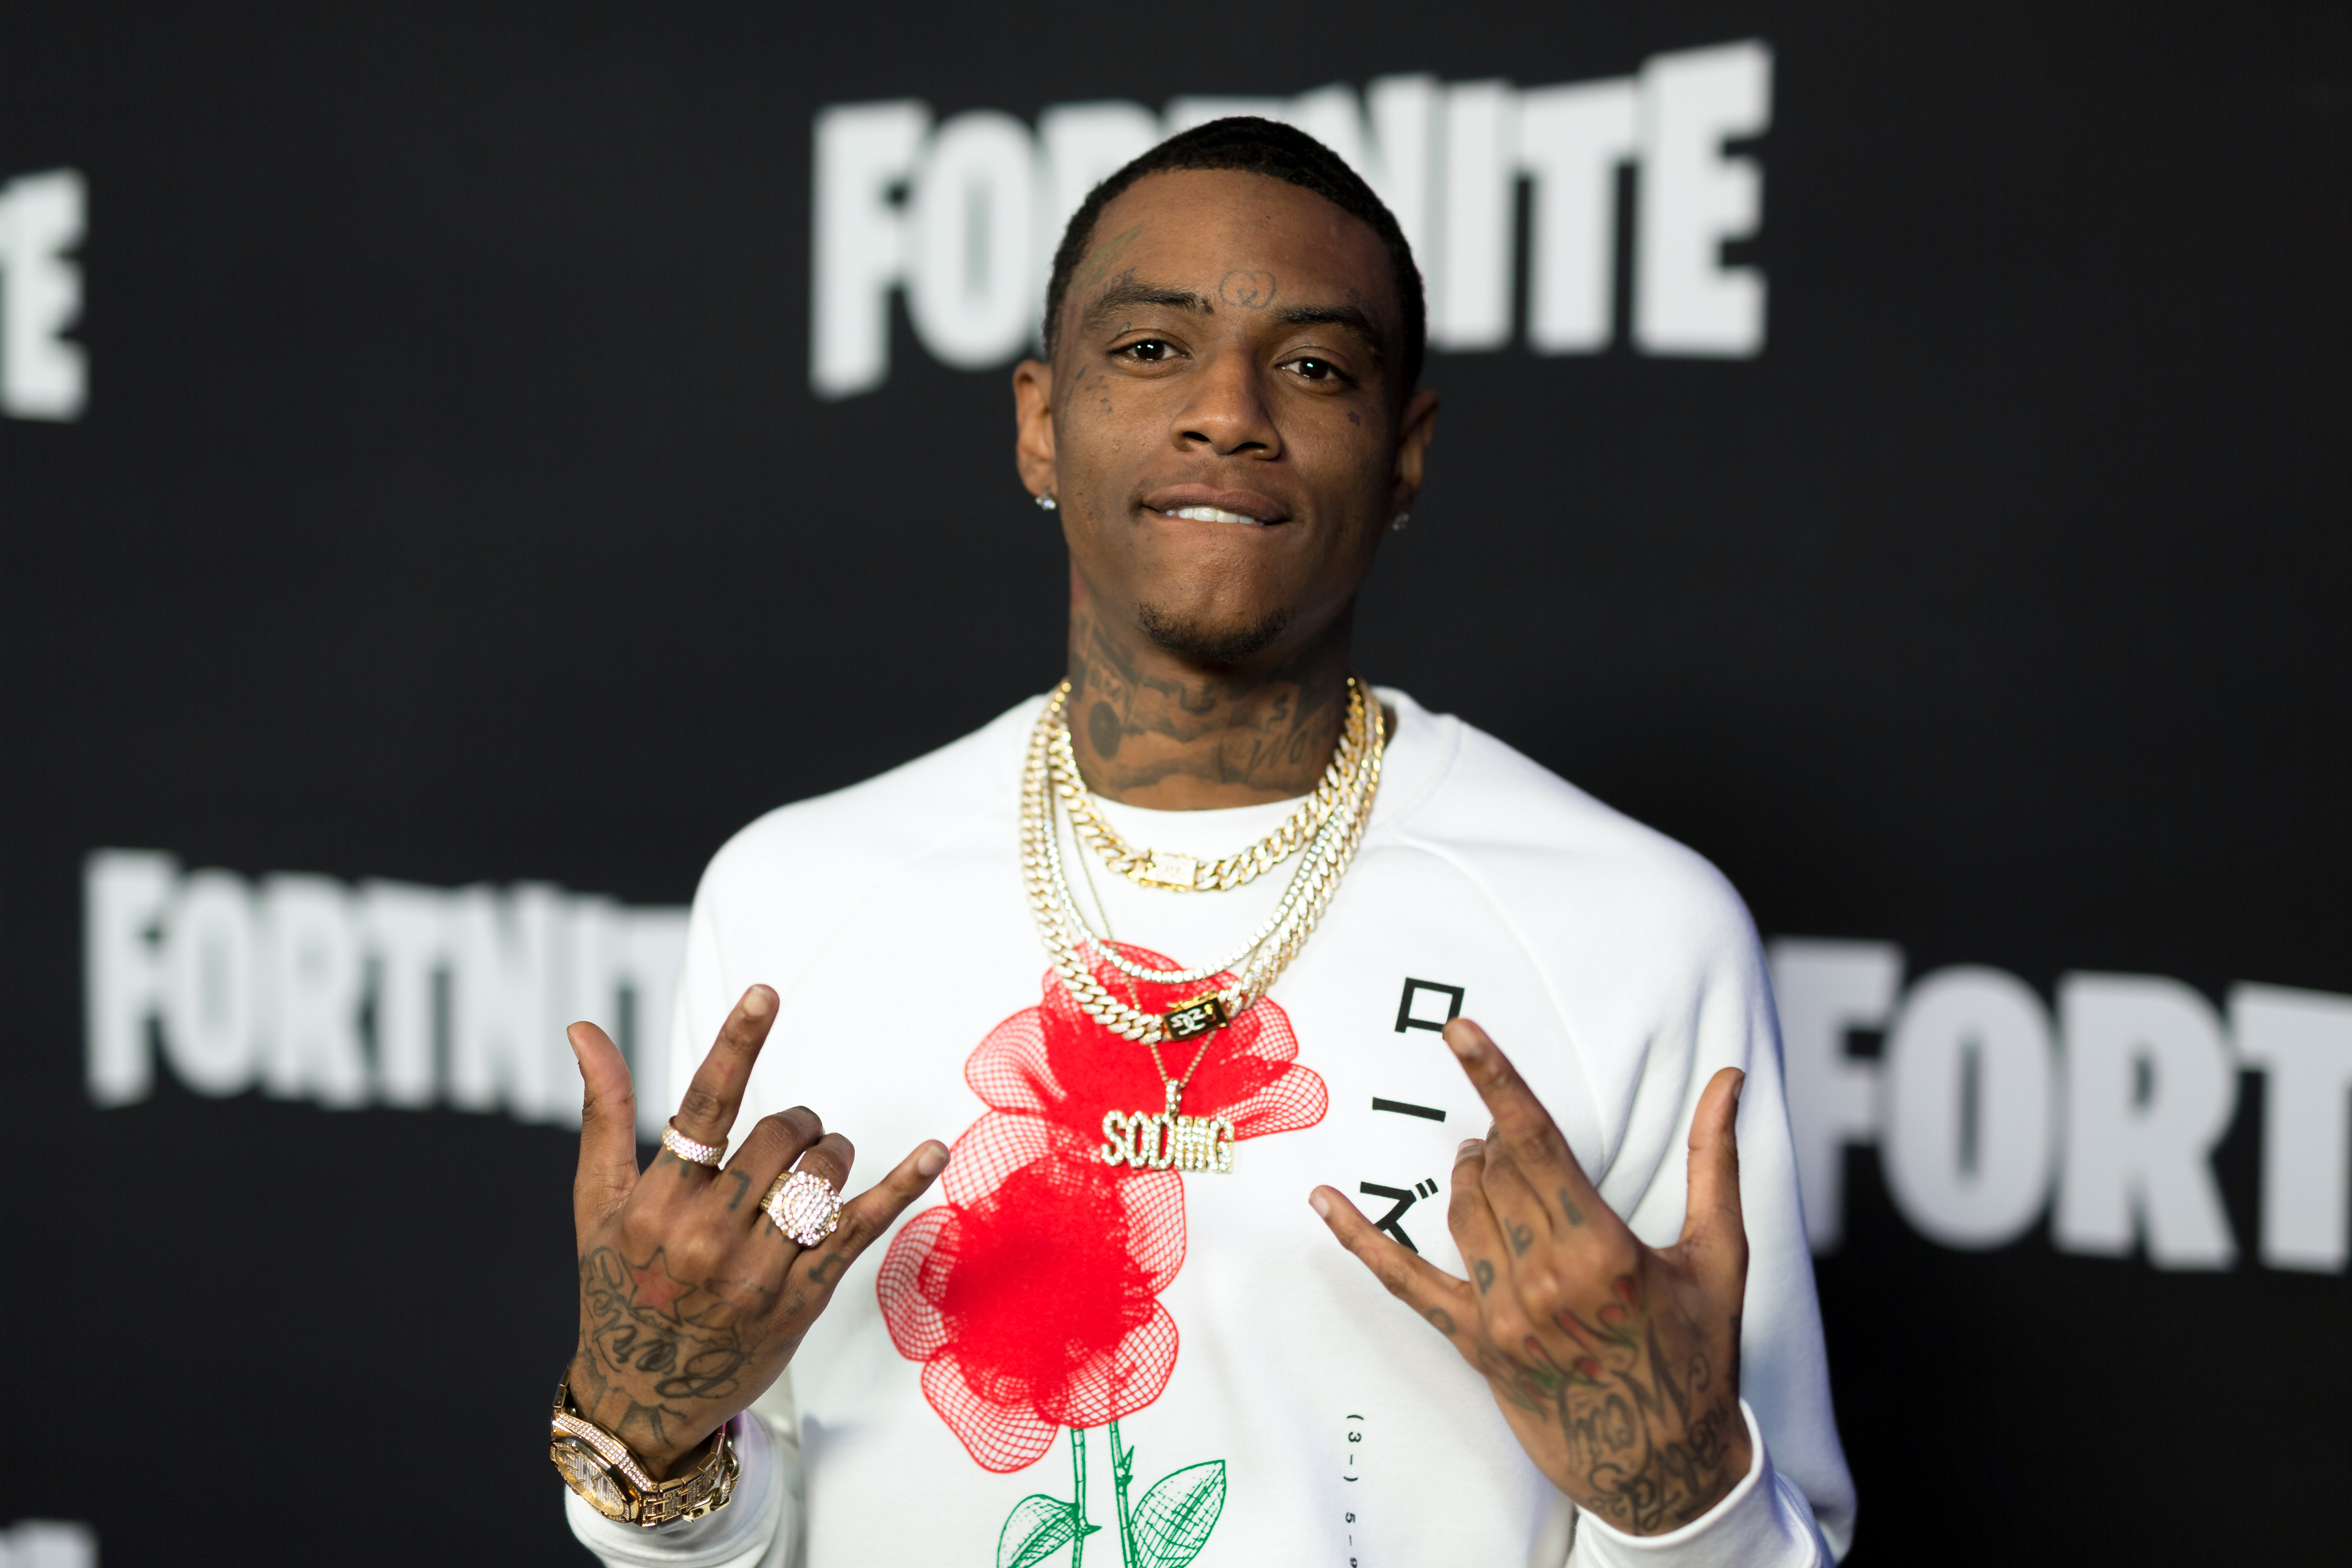 Soulja Boy Involved In Car Accident Caused By California Mudslides 25